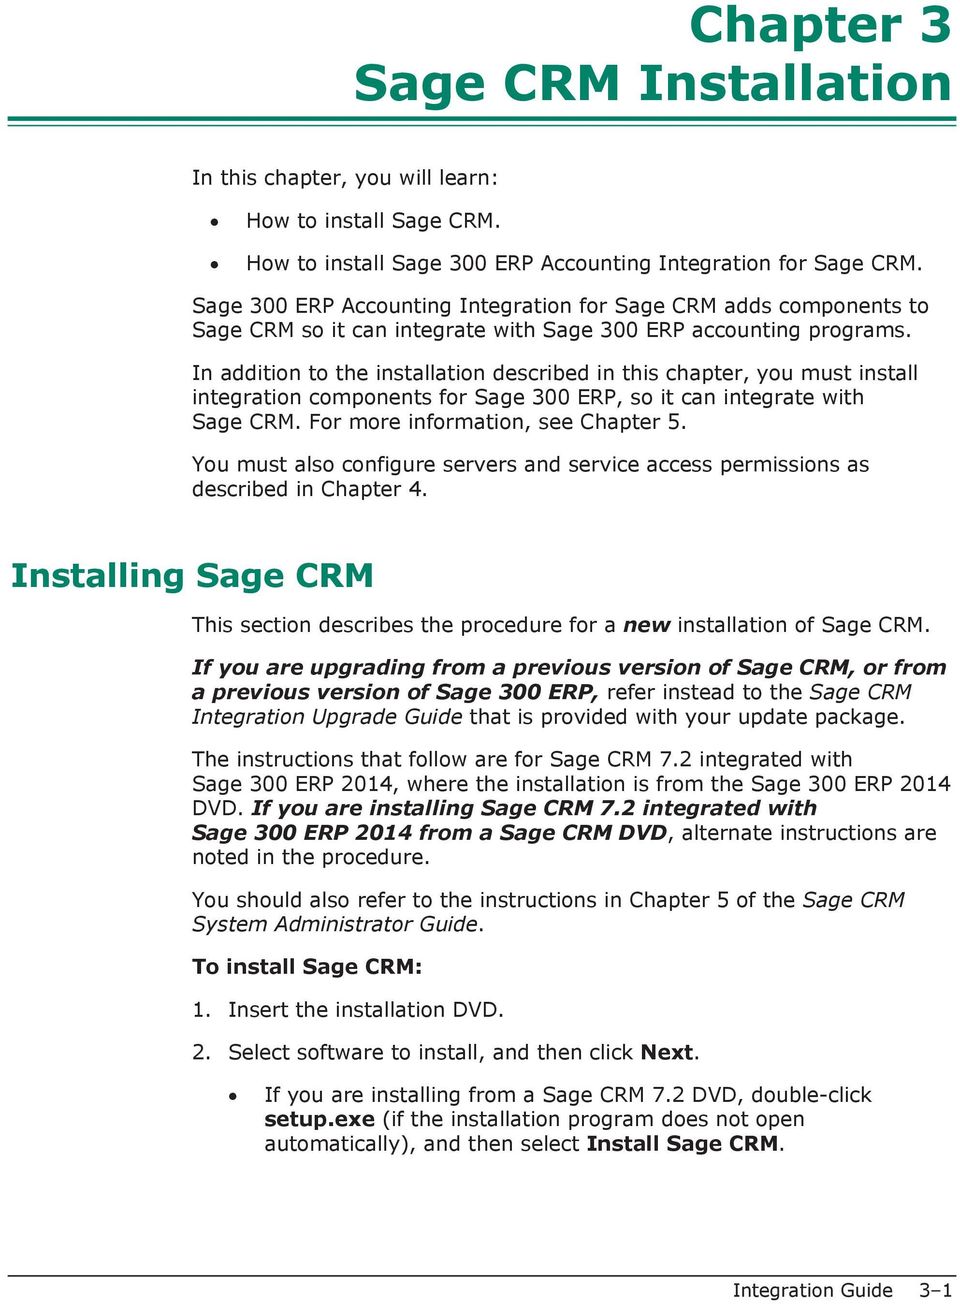 In addition to the installation described in this chapter, you must install integration components for Sage 300 ERP, so it can integrate with Sage CRM. For more information, see Chapter 5.